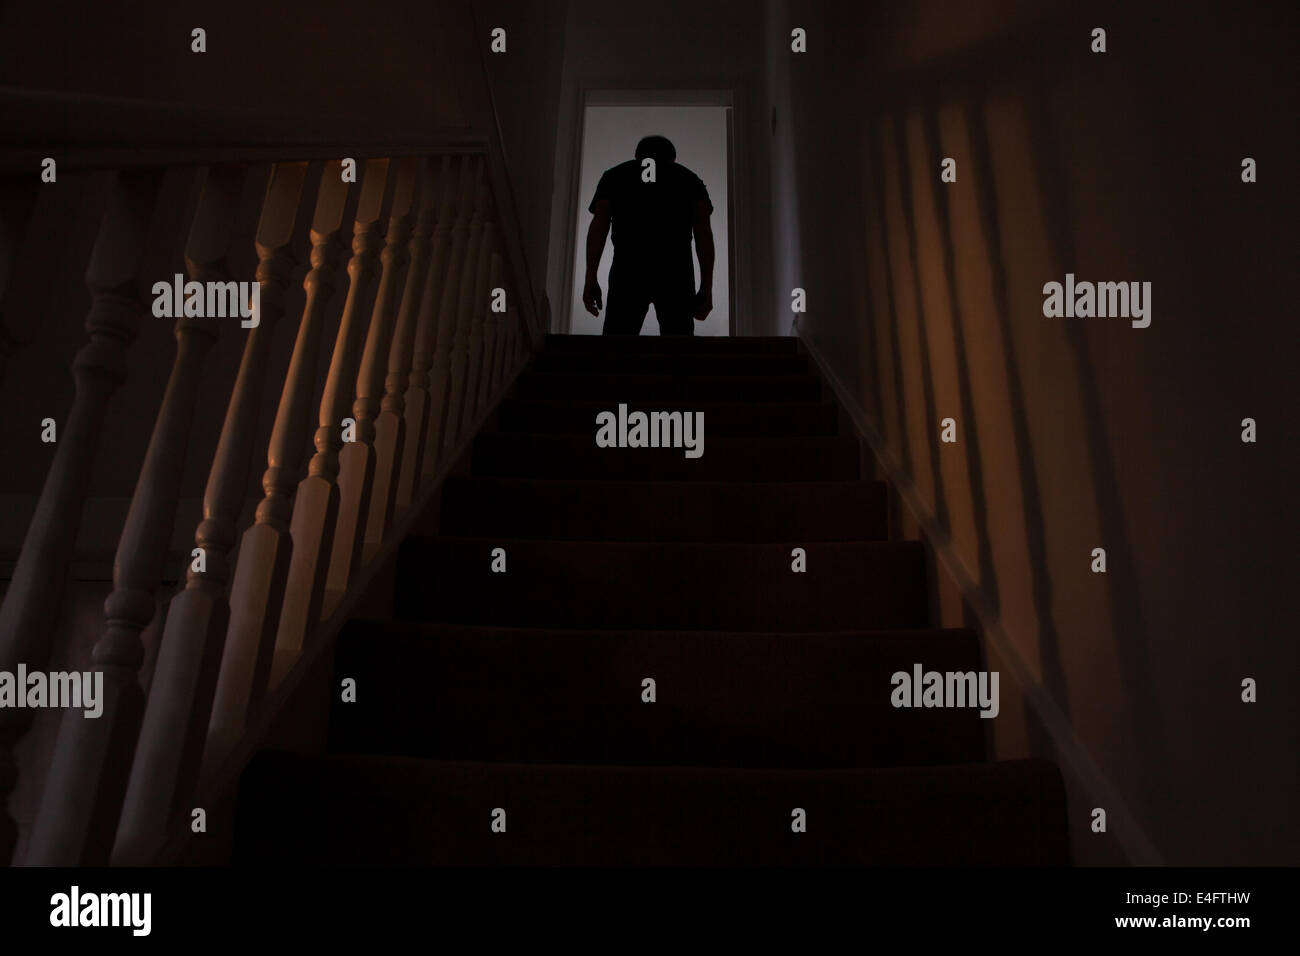 Silhouette of a man standing slumped at the top of a stairway, shadows cast on the walls from the light below. See similar shots Stock Photo